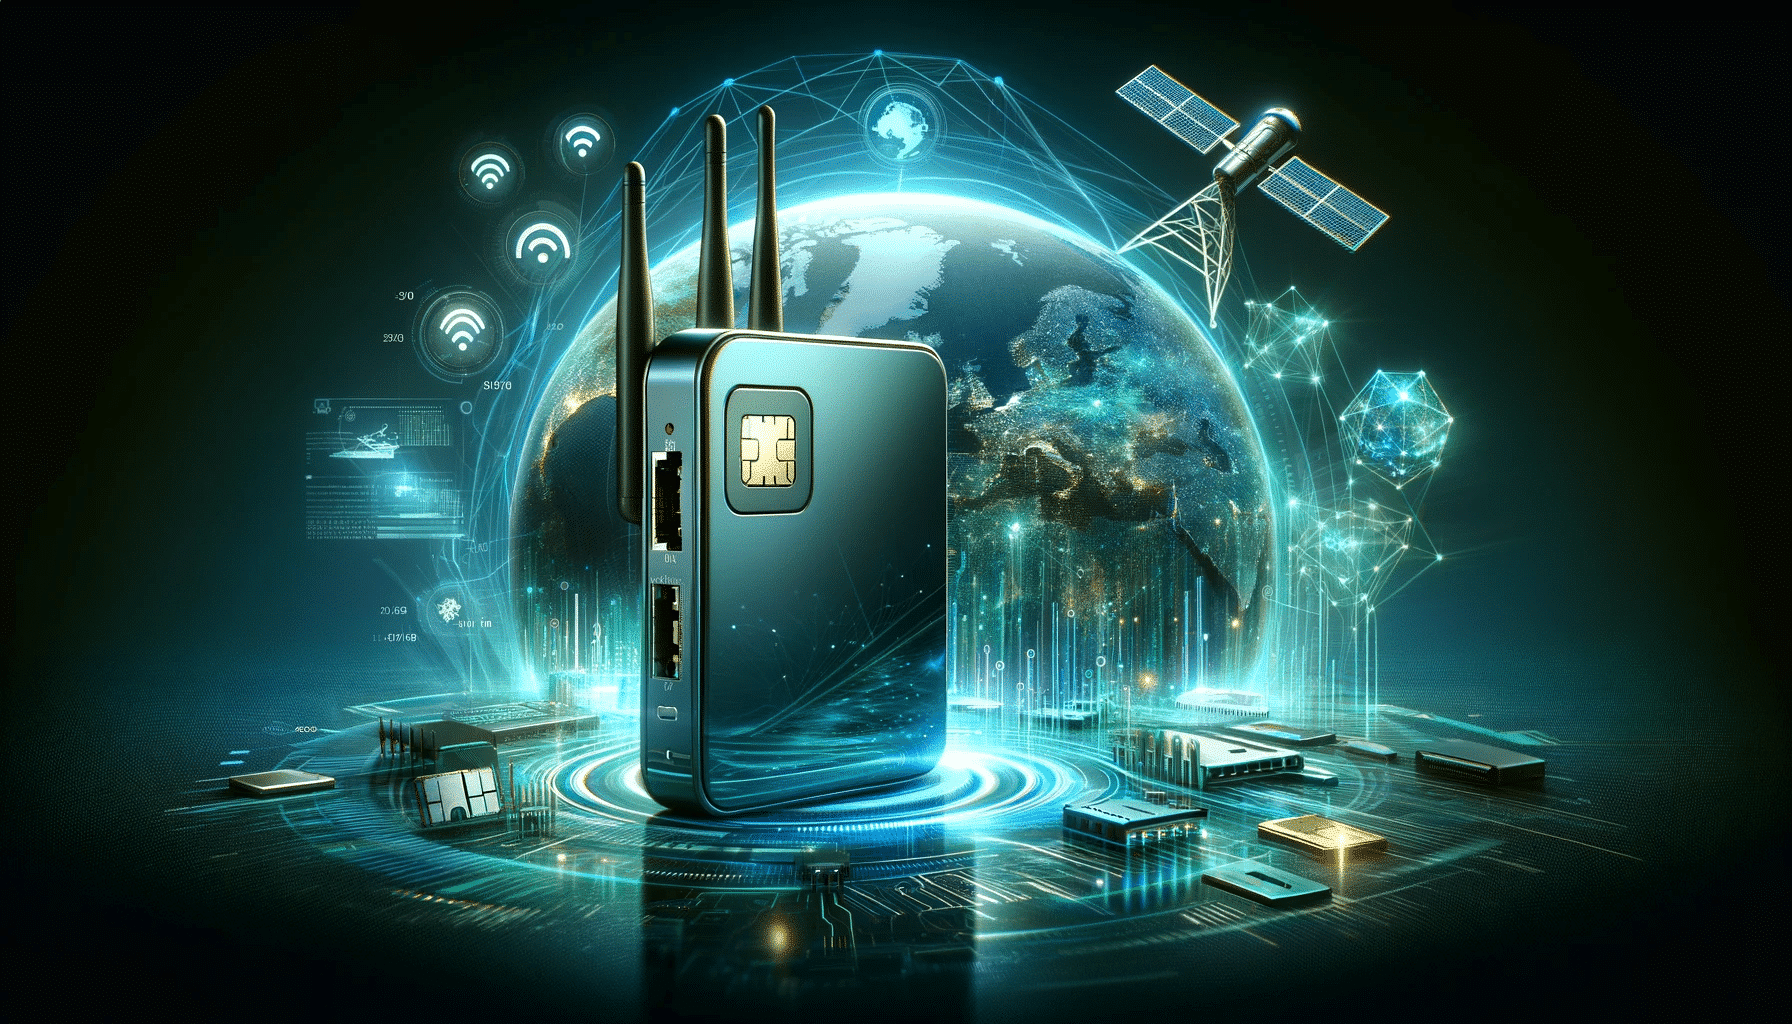 Modern design of a mobile router with SIM card slot, surrounded by network connectivity icons, digital data streams and satellite images representing the integration of Starlink technology, on a futuristic digital background in cool blue and green tones, symbolizing advanced mobile internet technology.